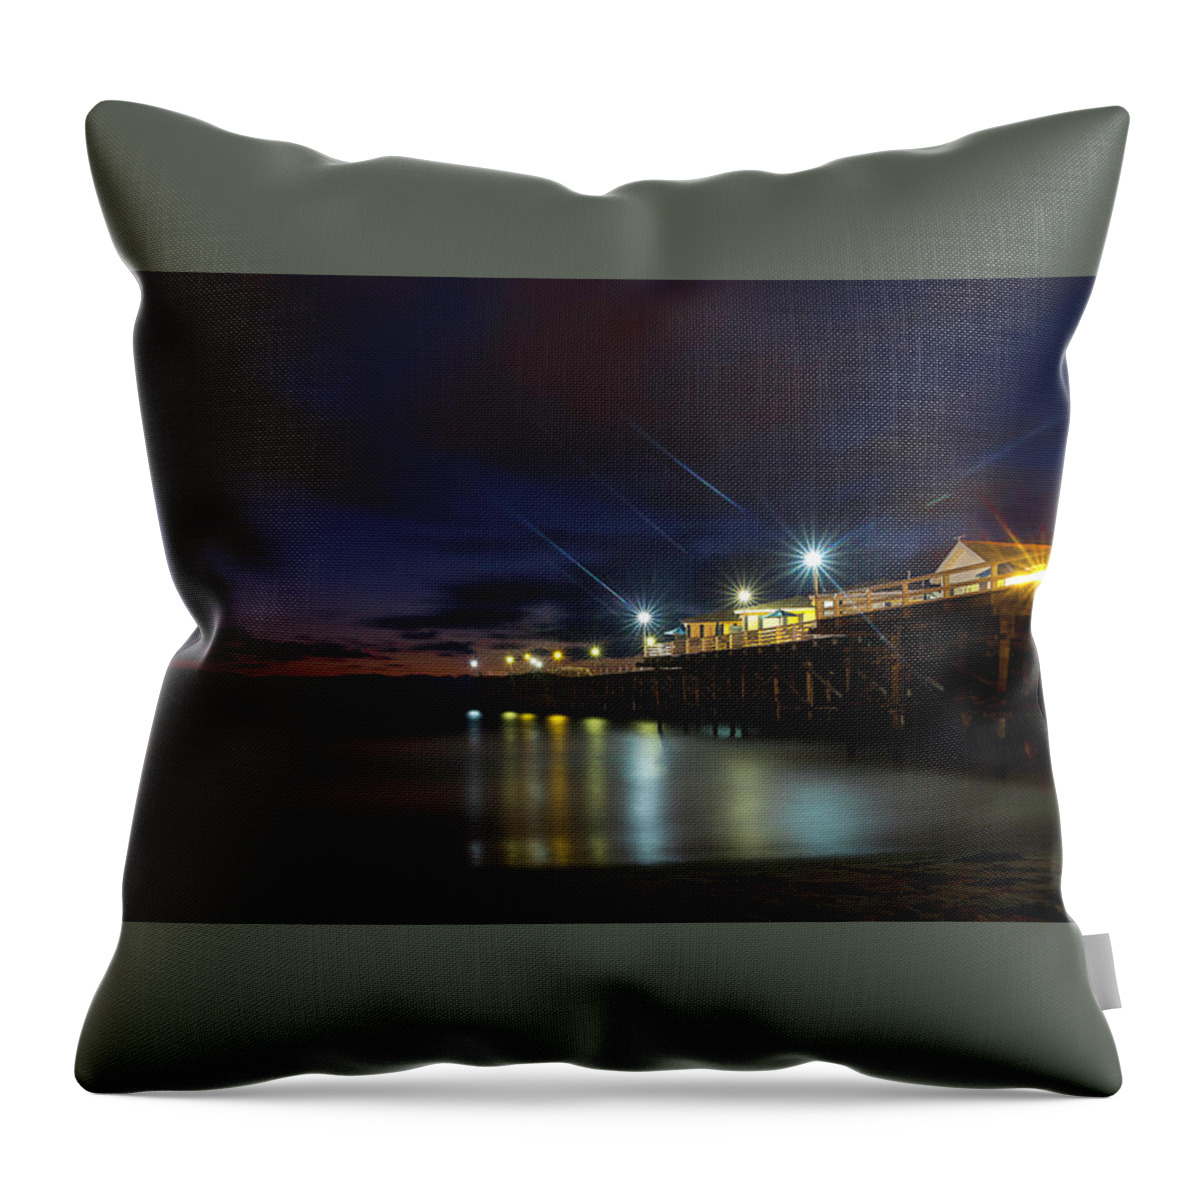 2017 Throw Pillow featuring the photograph Crystal Beach Pier Blue Hour by James Sage